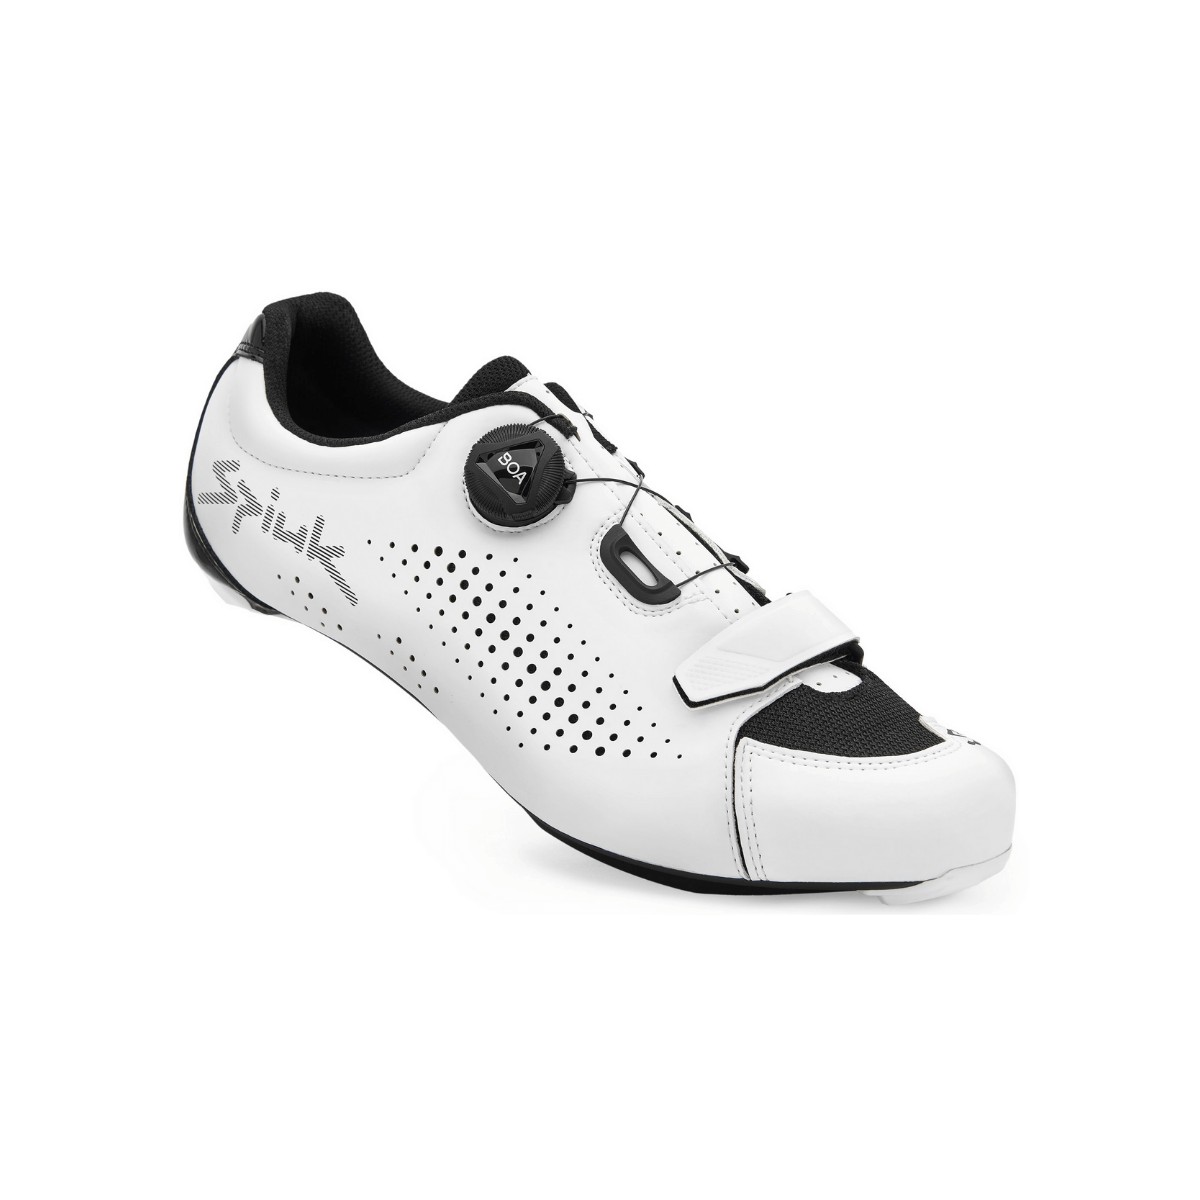 Spiuk Caray Road White Shoes, Size 45 - EUR